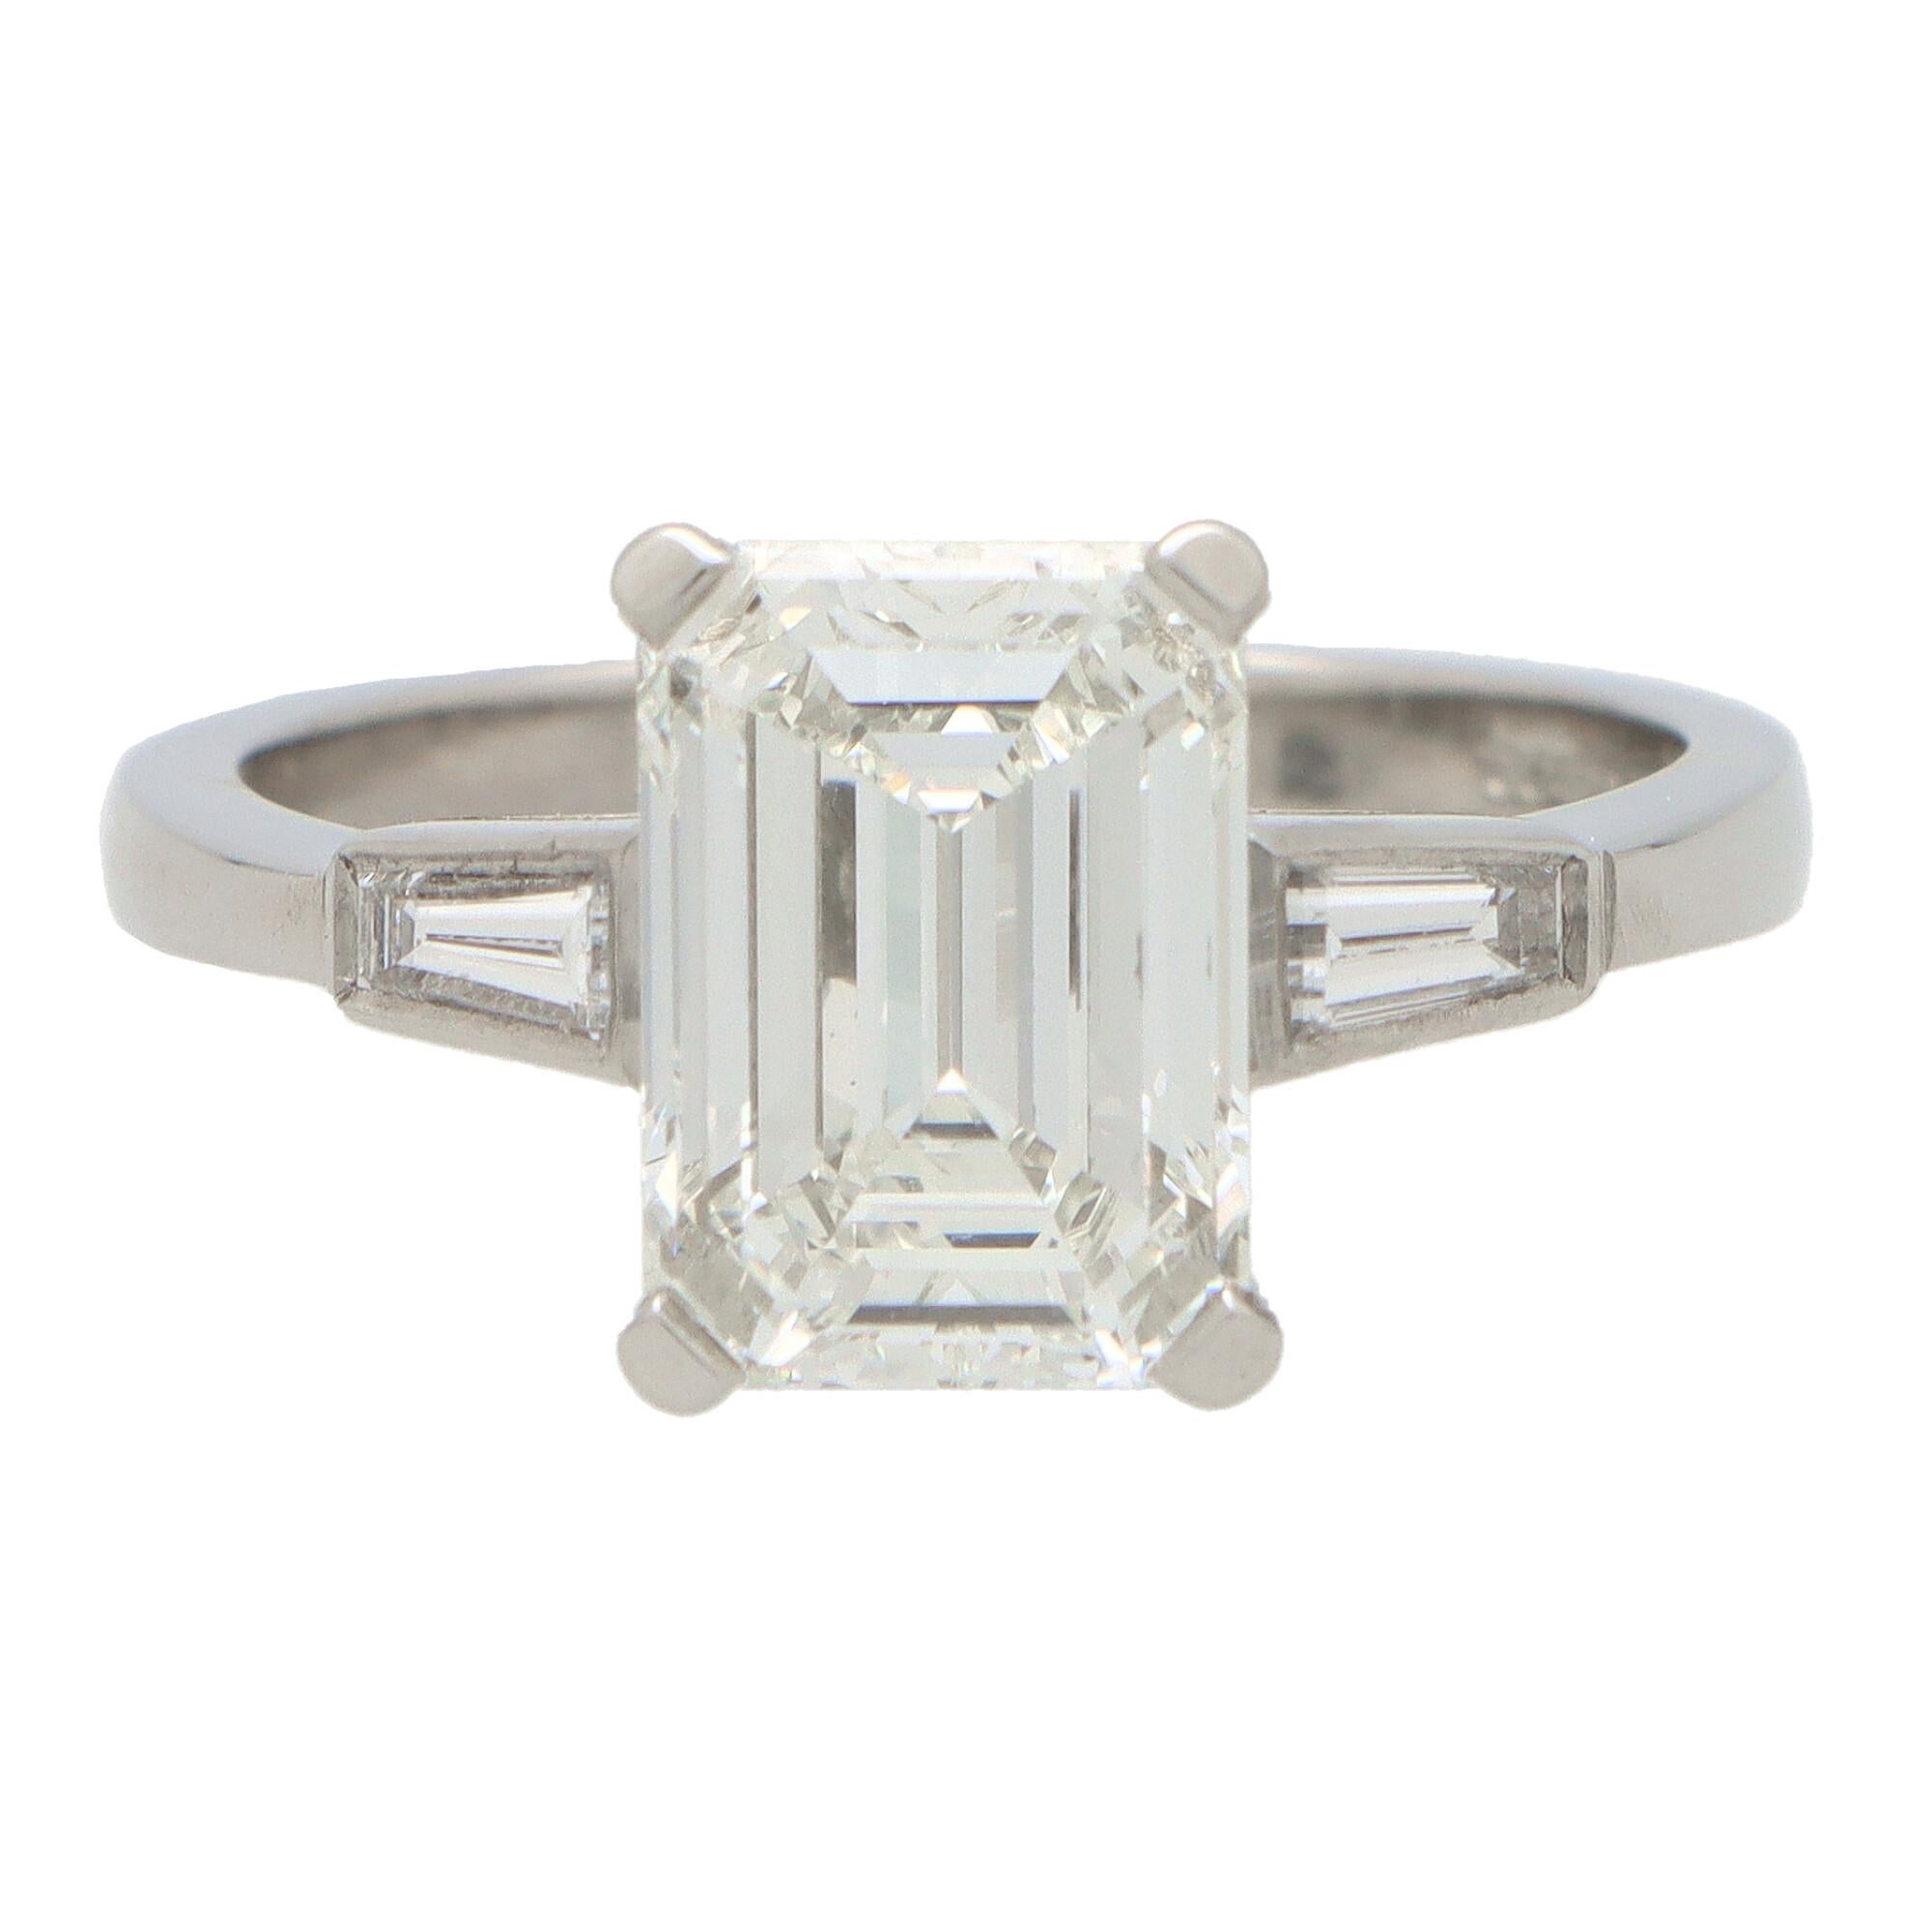 A beautiful certified emerald cut diamond ring set in platinum.

The ring is centrally set with an outstanding certified 3.20 carat emerald cut diamond which is securely claw set to centre. Siding the central stone are two perfectly tapered baguette